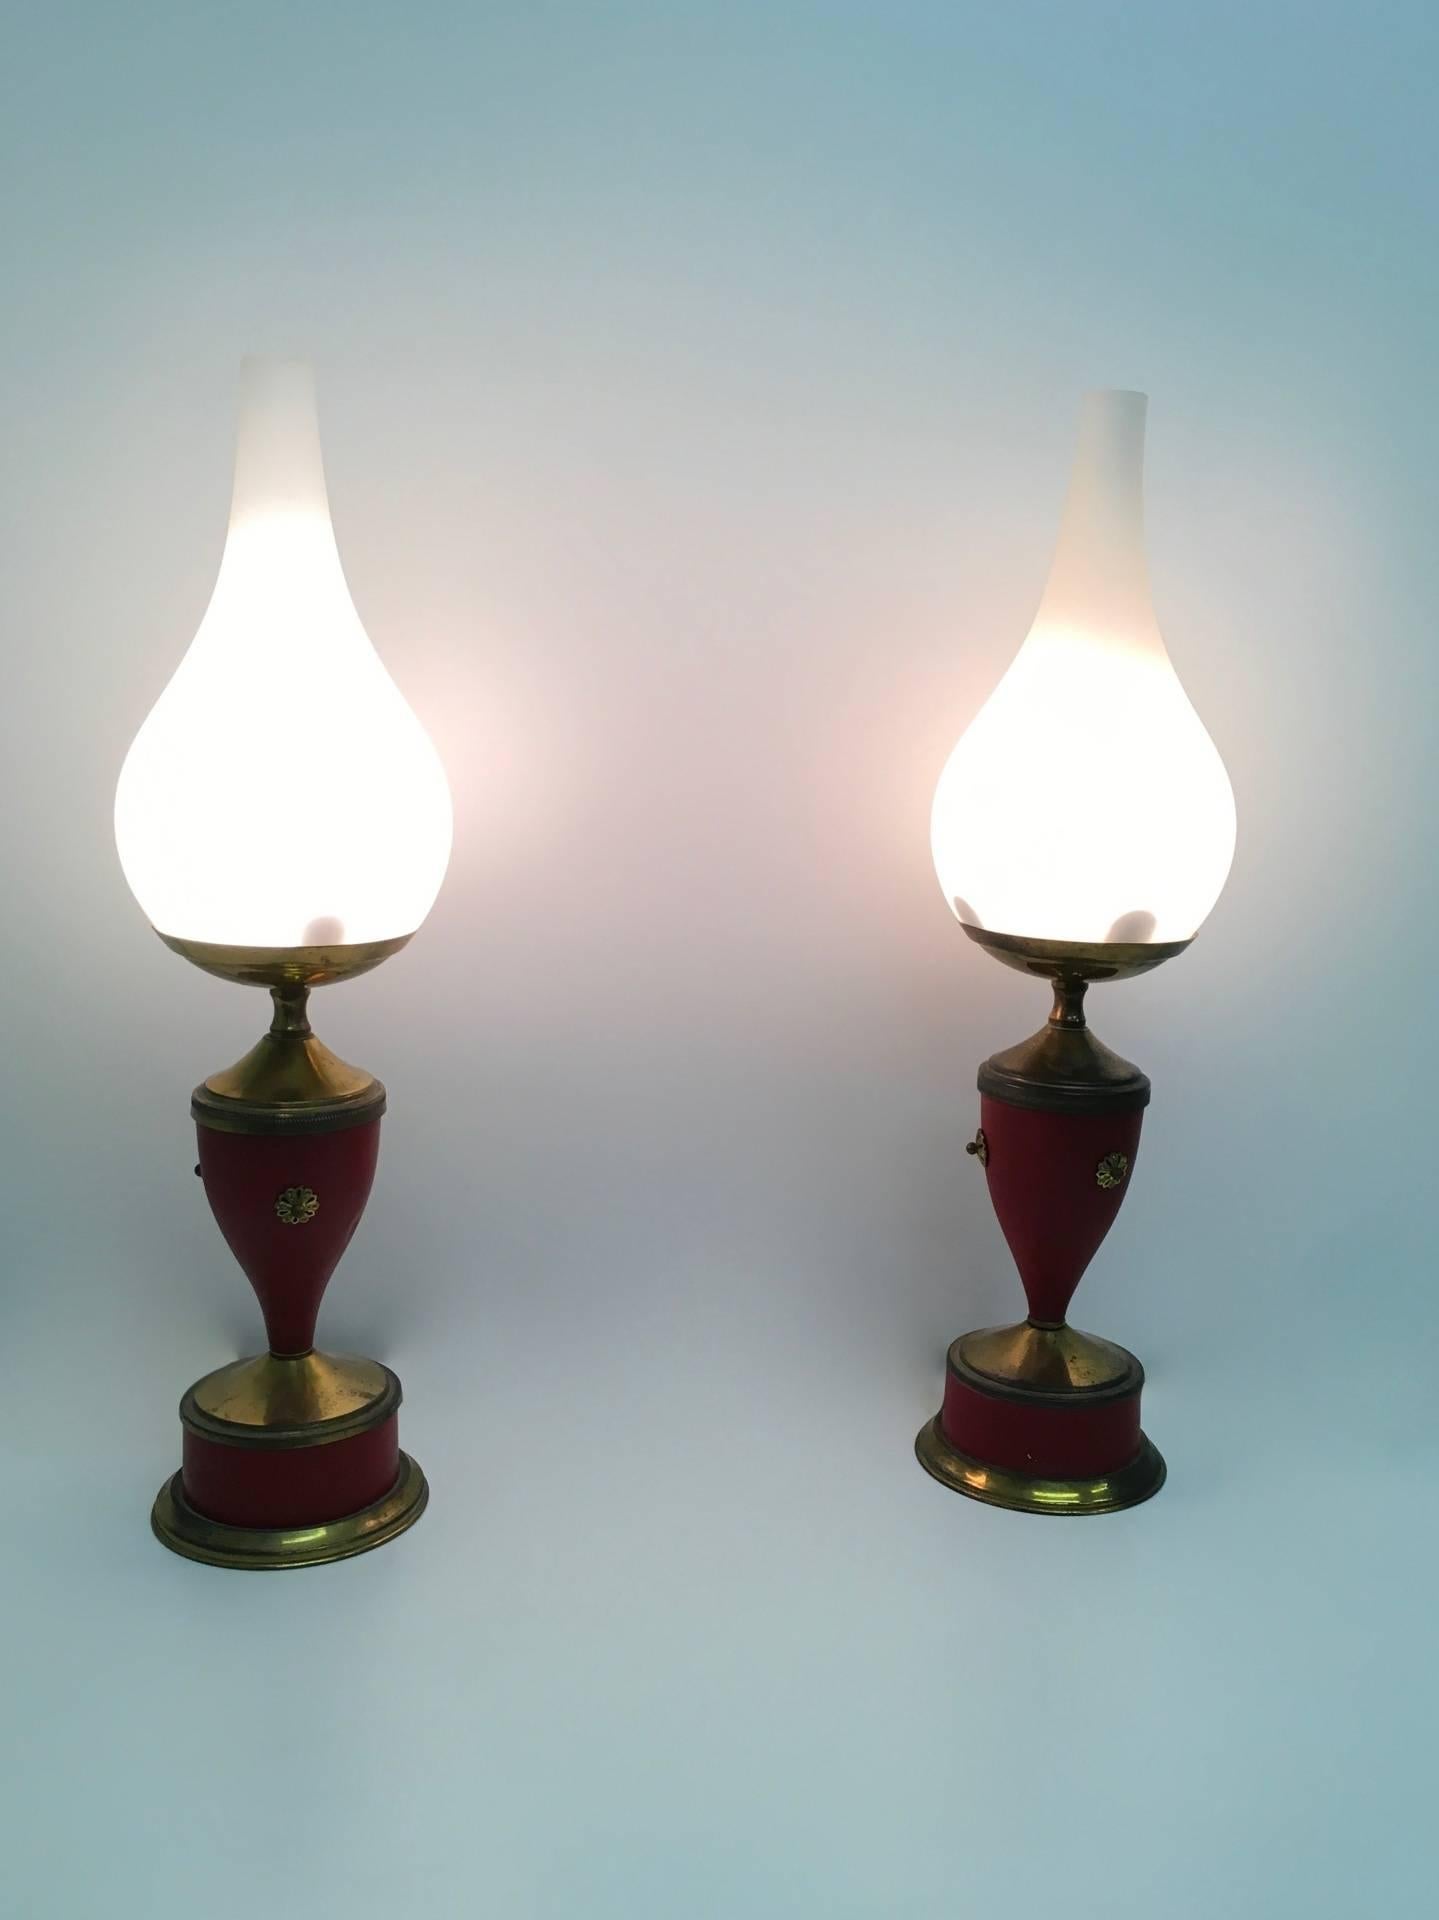 Made in Italy, 1950s. 
These table lamps have a red varnished metal and brass base and an opaline glass shade.
They are vintage pieces, therefore they might show slight traces of use, but they can be considered as in good original